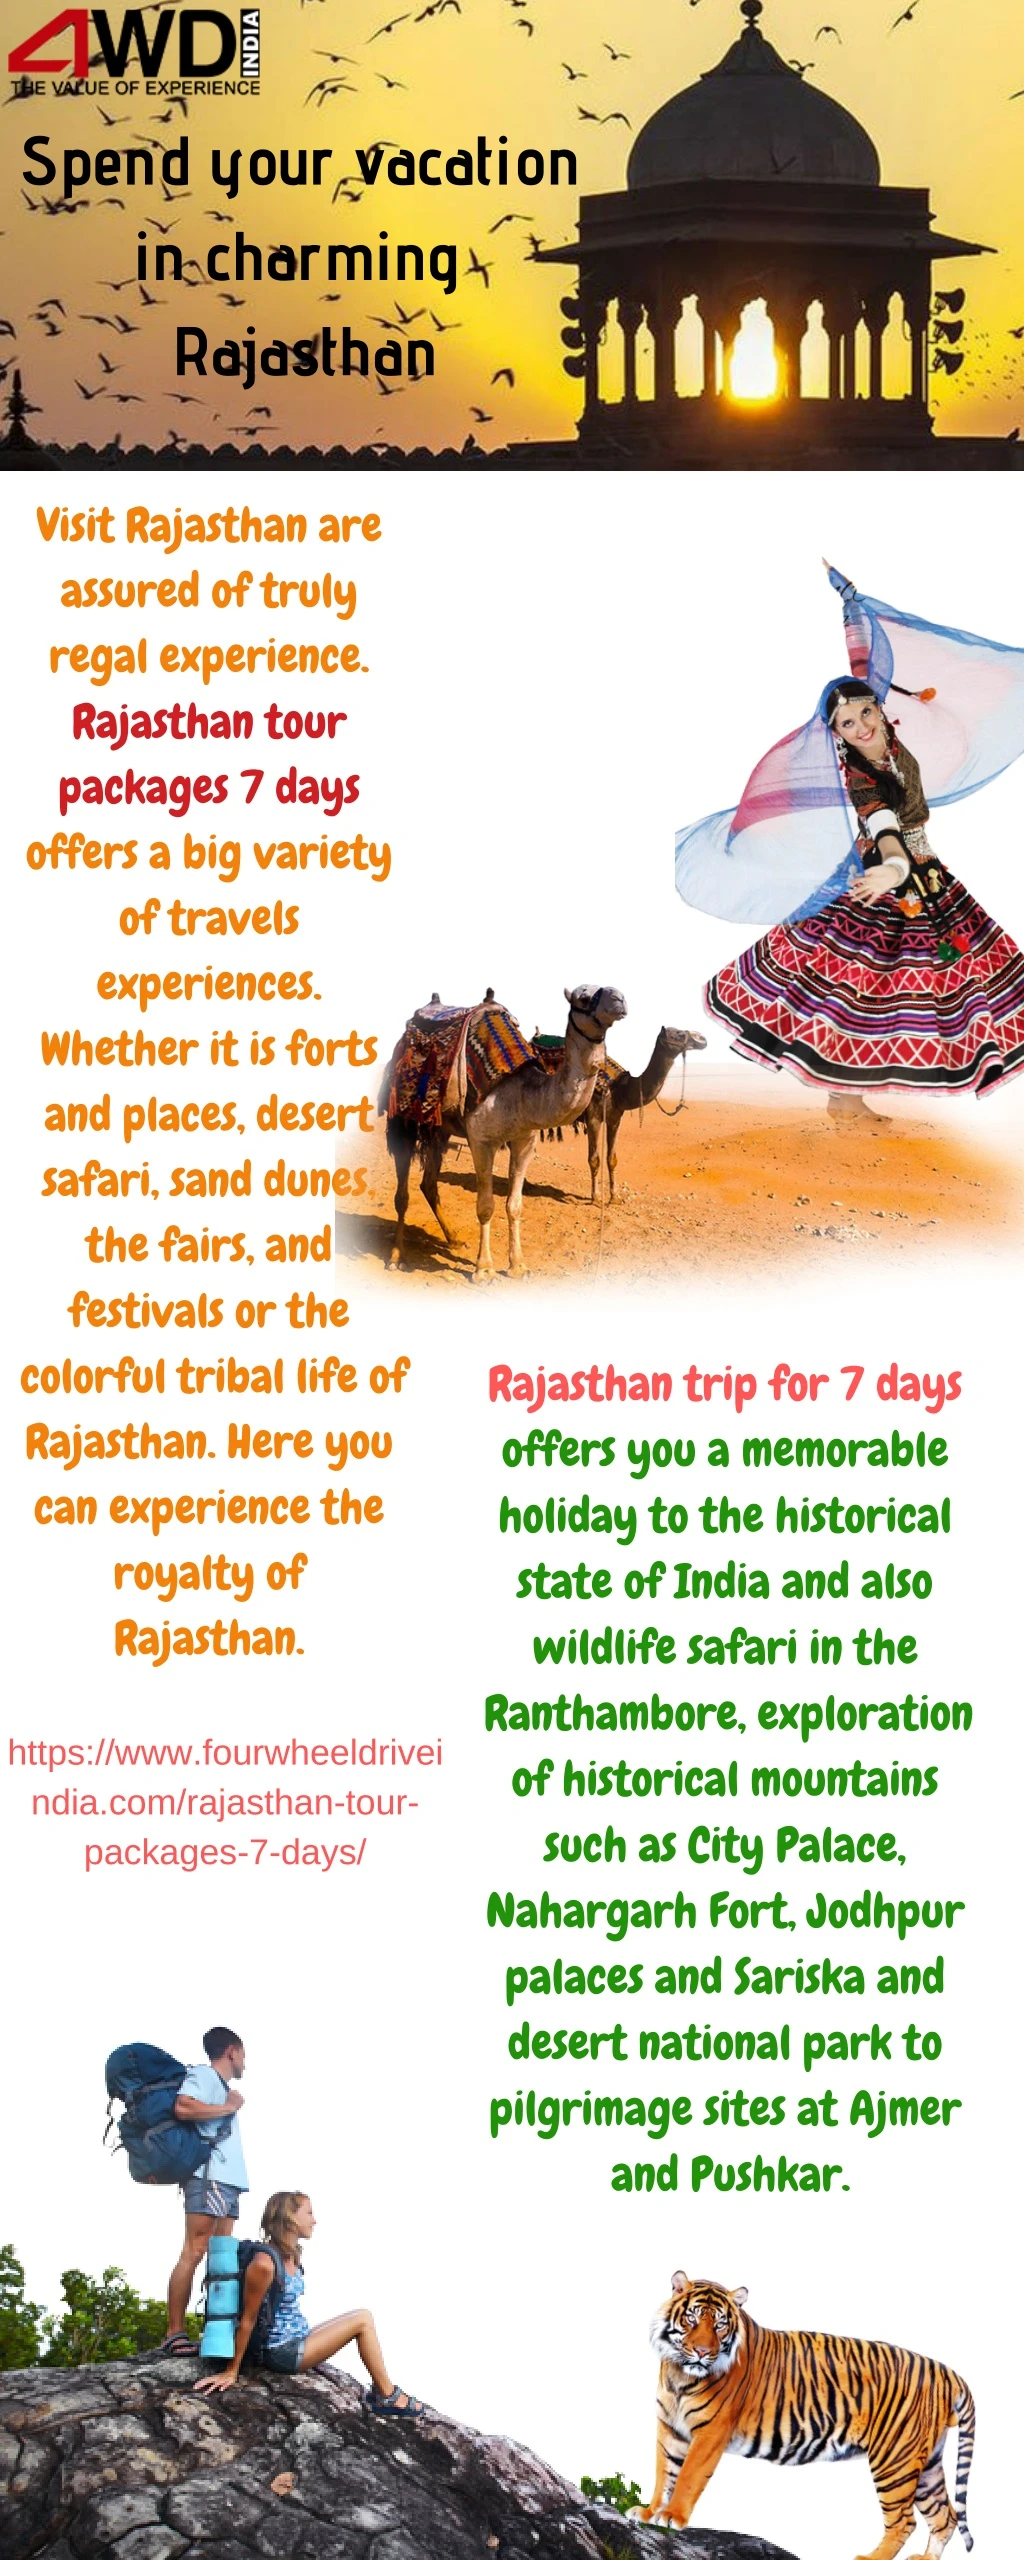 spend your vacation in charming rajasthan